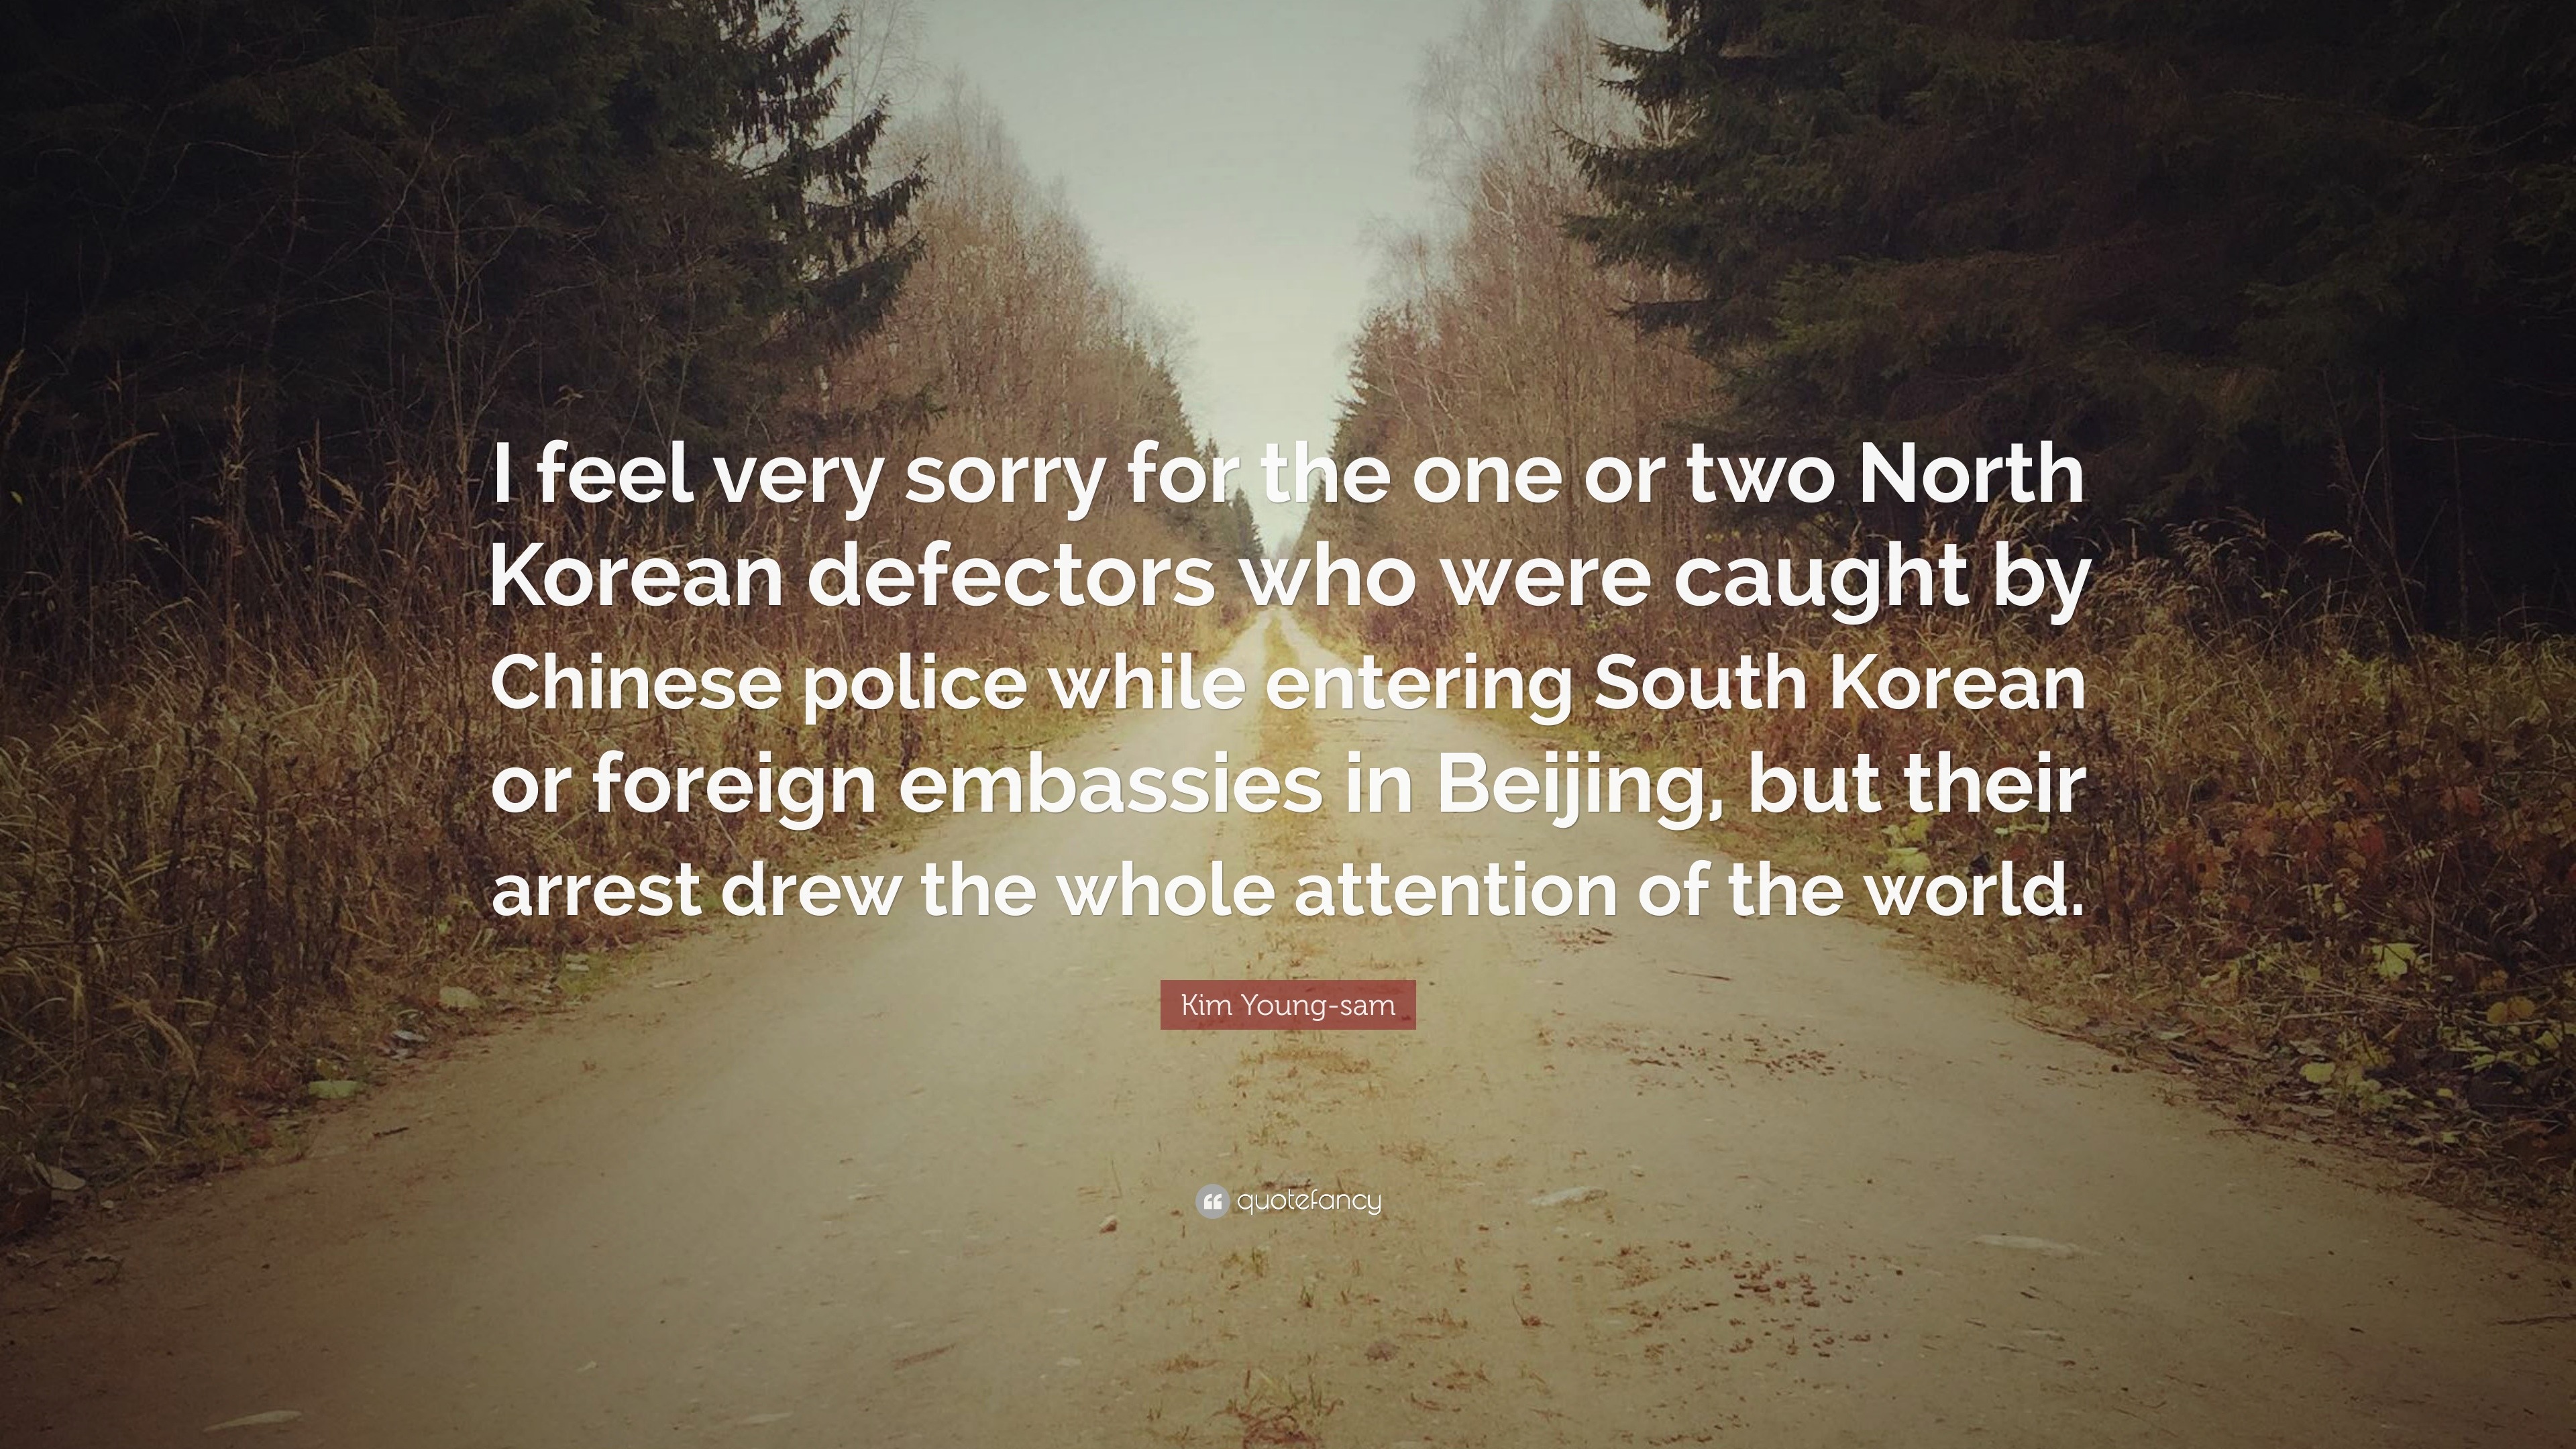 Kim Young-Sam Quote: “I Feel Very Sorry For The One Or Two North Korean Defectors Who Were Caught By Chinese Police While Entering South Korea...”